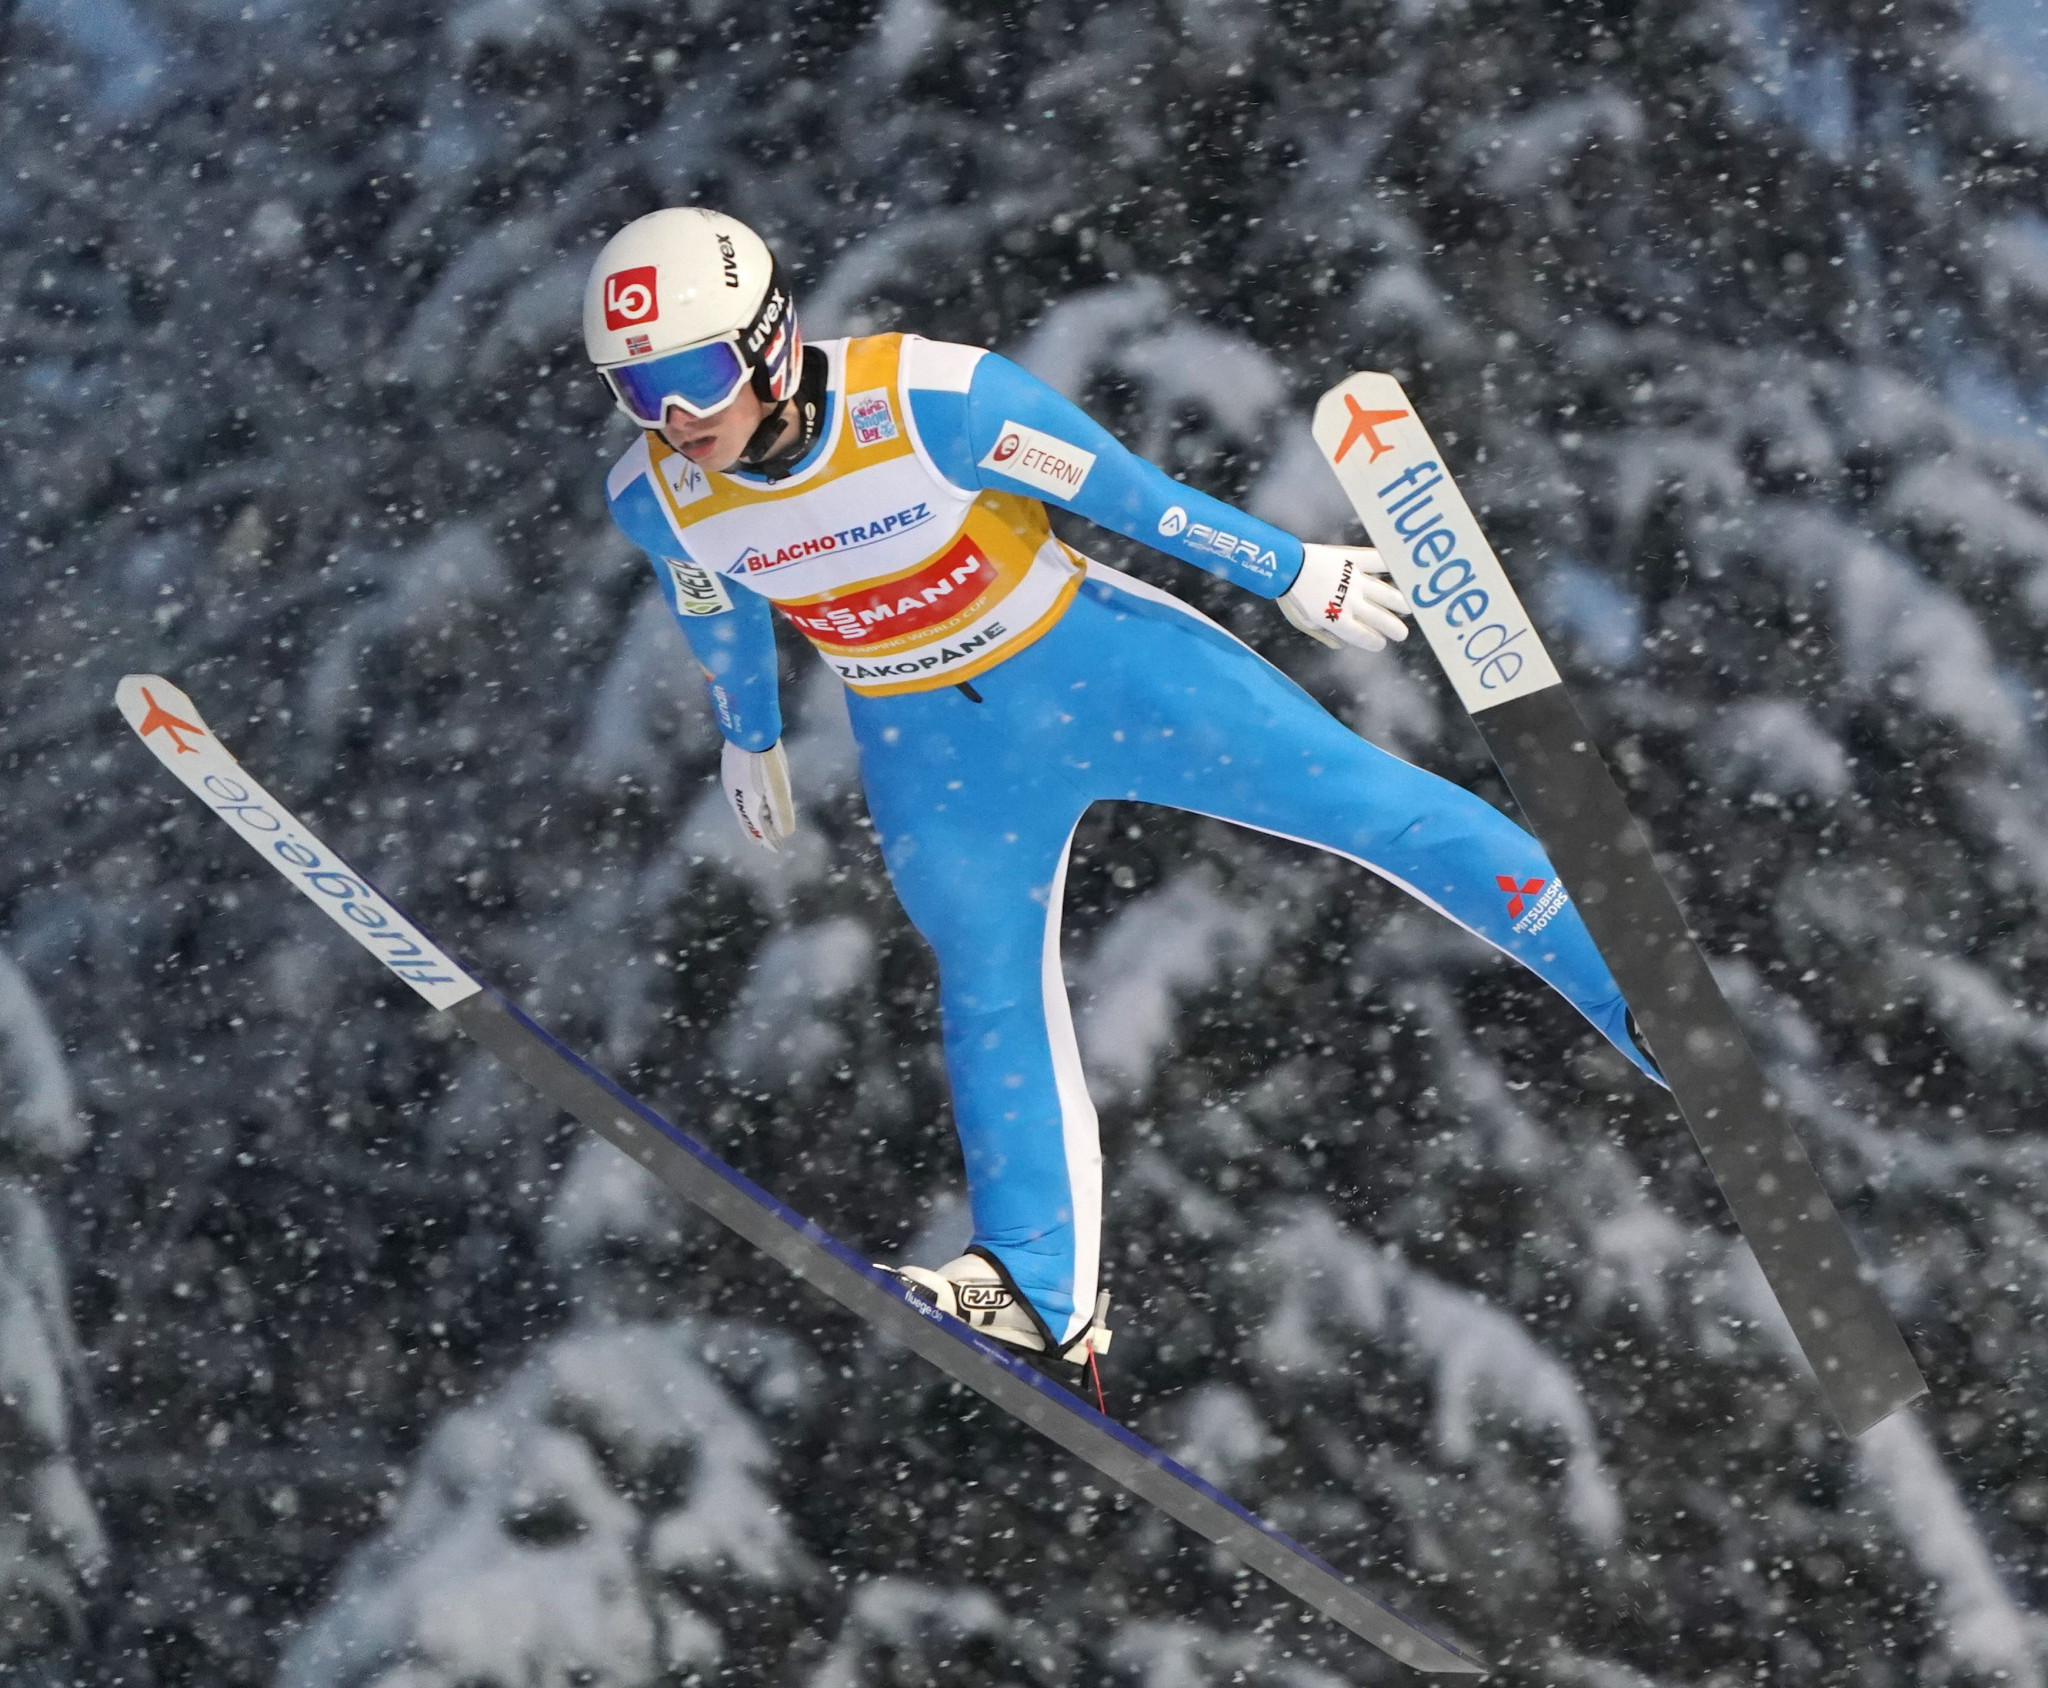 Granerud wins fourth event in five on FIS Ski Jumping World Cup circuit